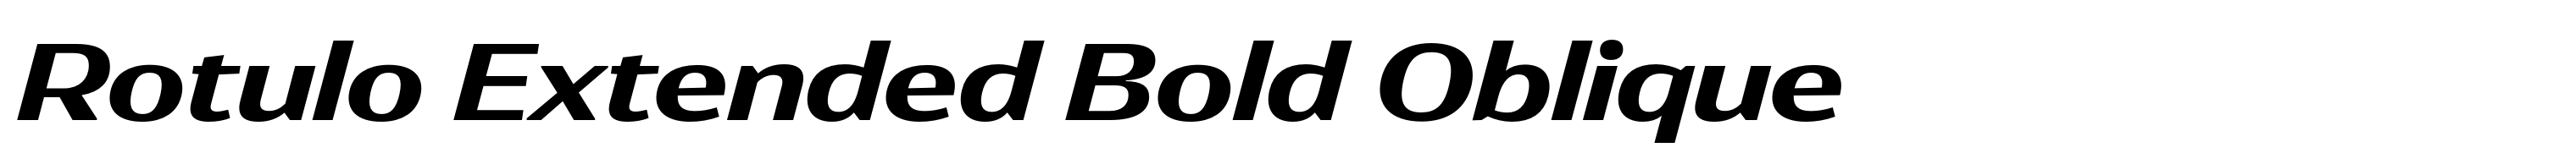 Rotulo Extended Bold Oblique